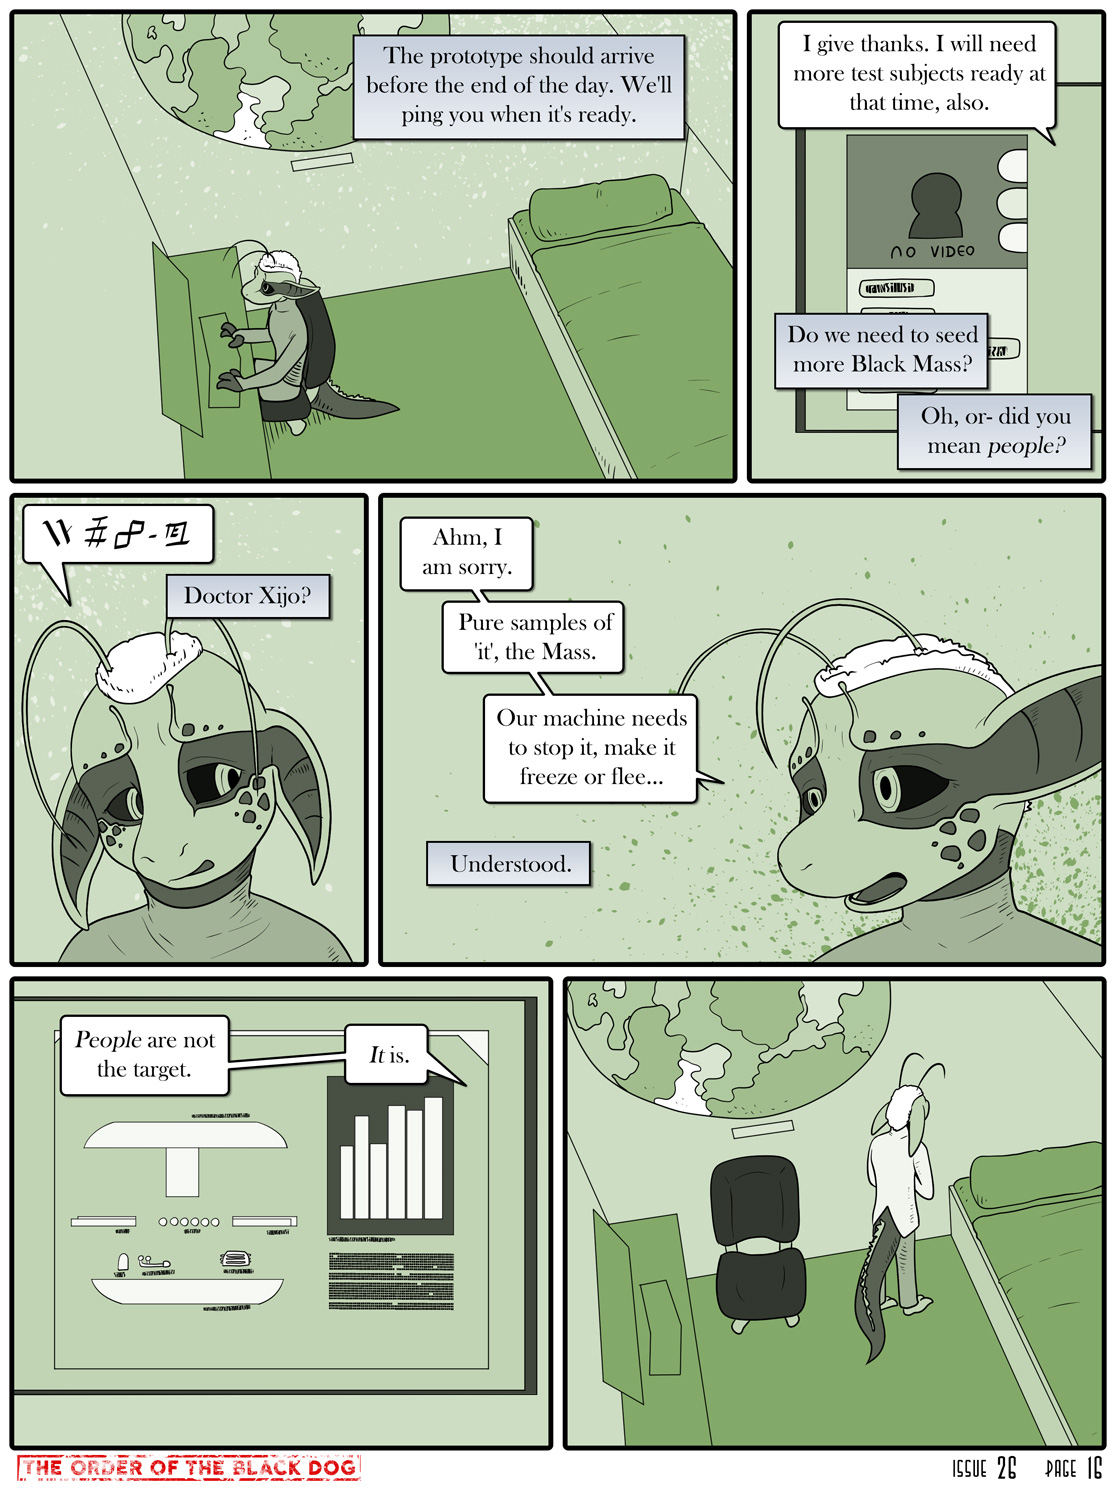 Issue 26, Page 16